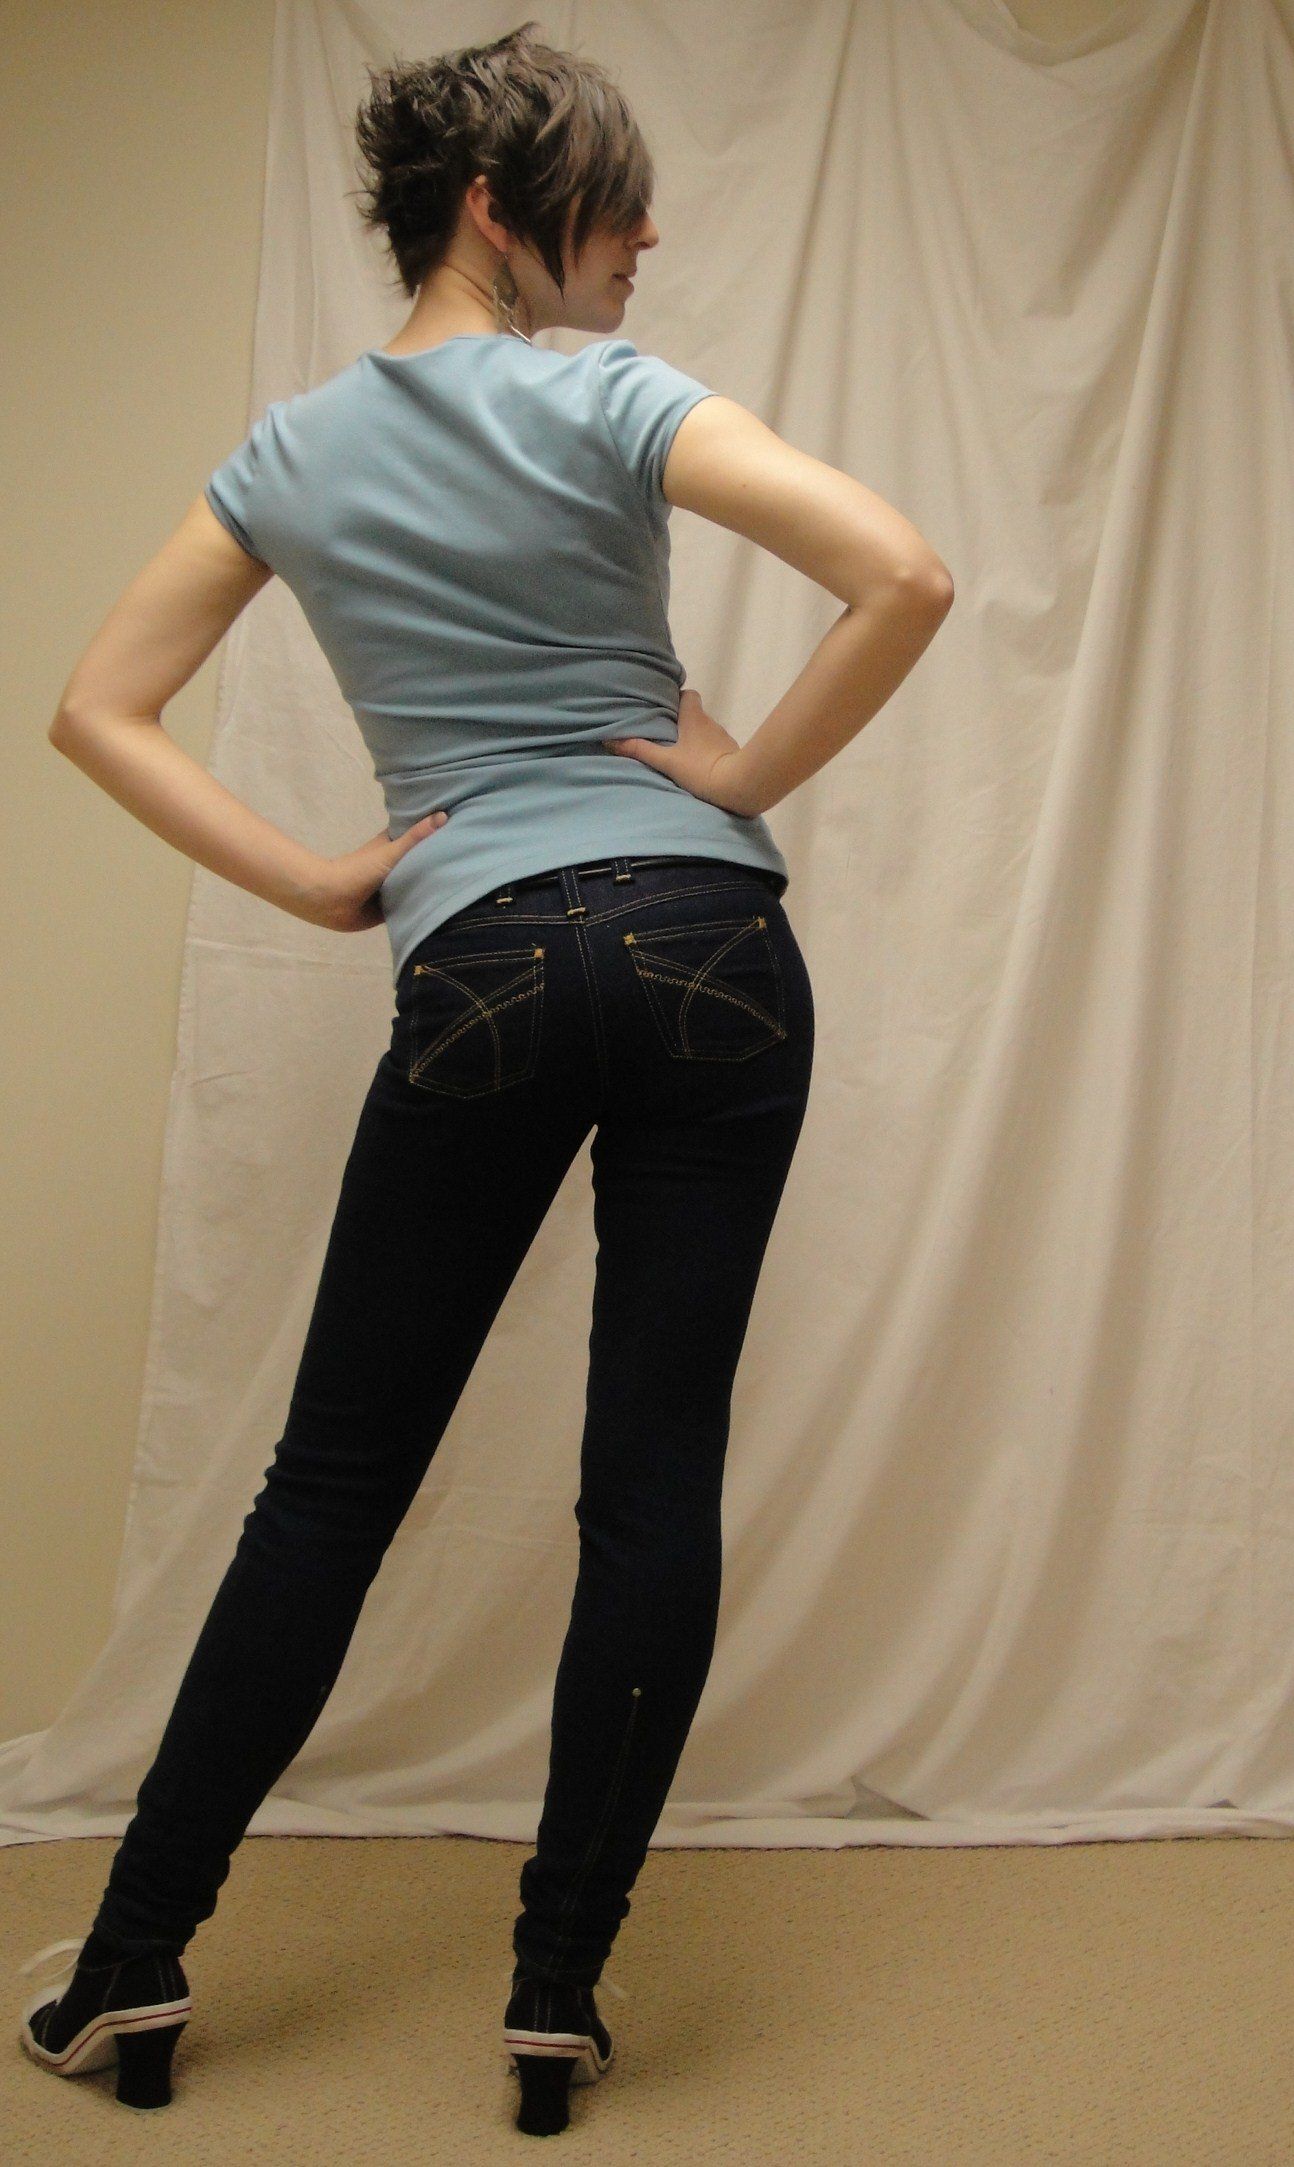 Red V. reccomend teen bending down tight jeans